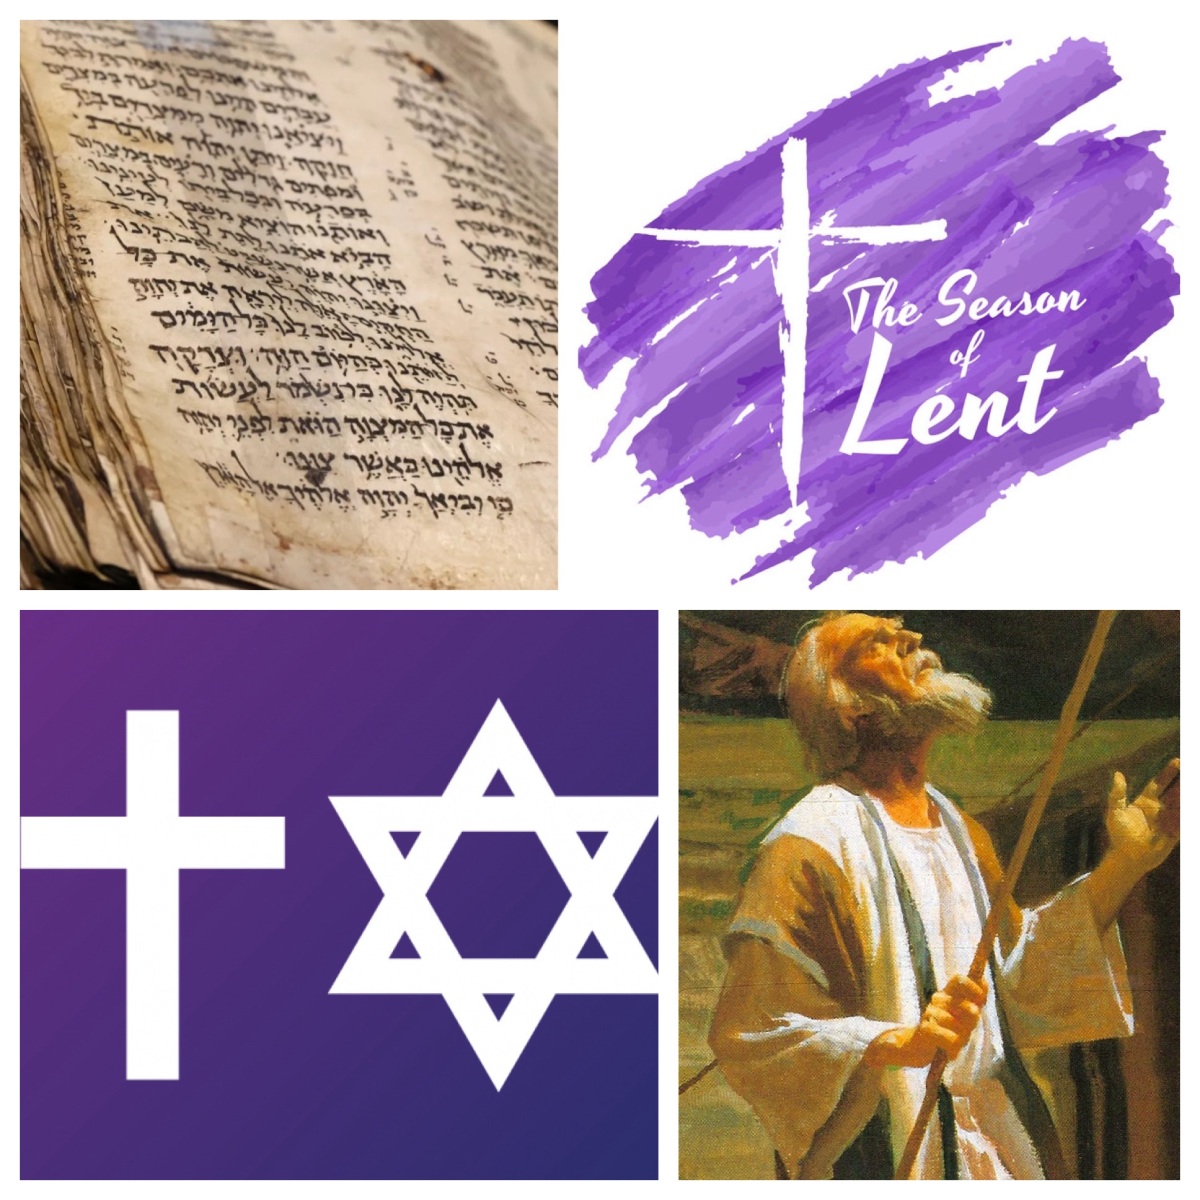 Reading Hebrew Scripture throughout Lent (Exodus 20 and other passages)